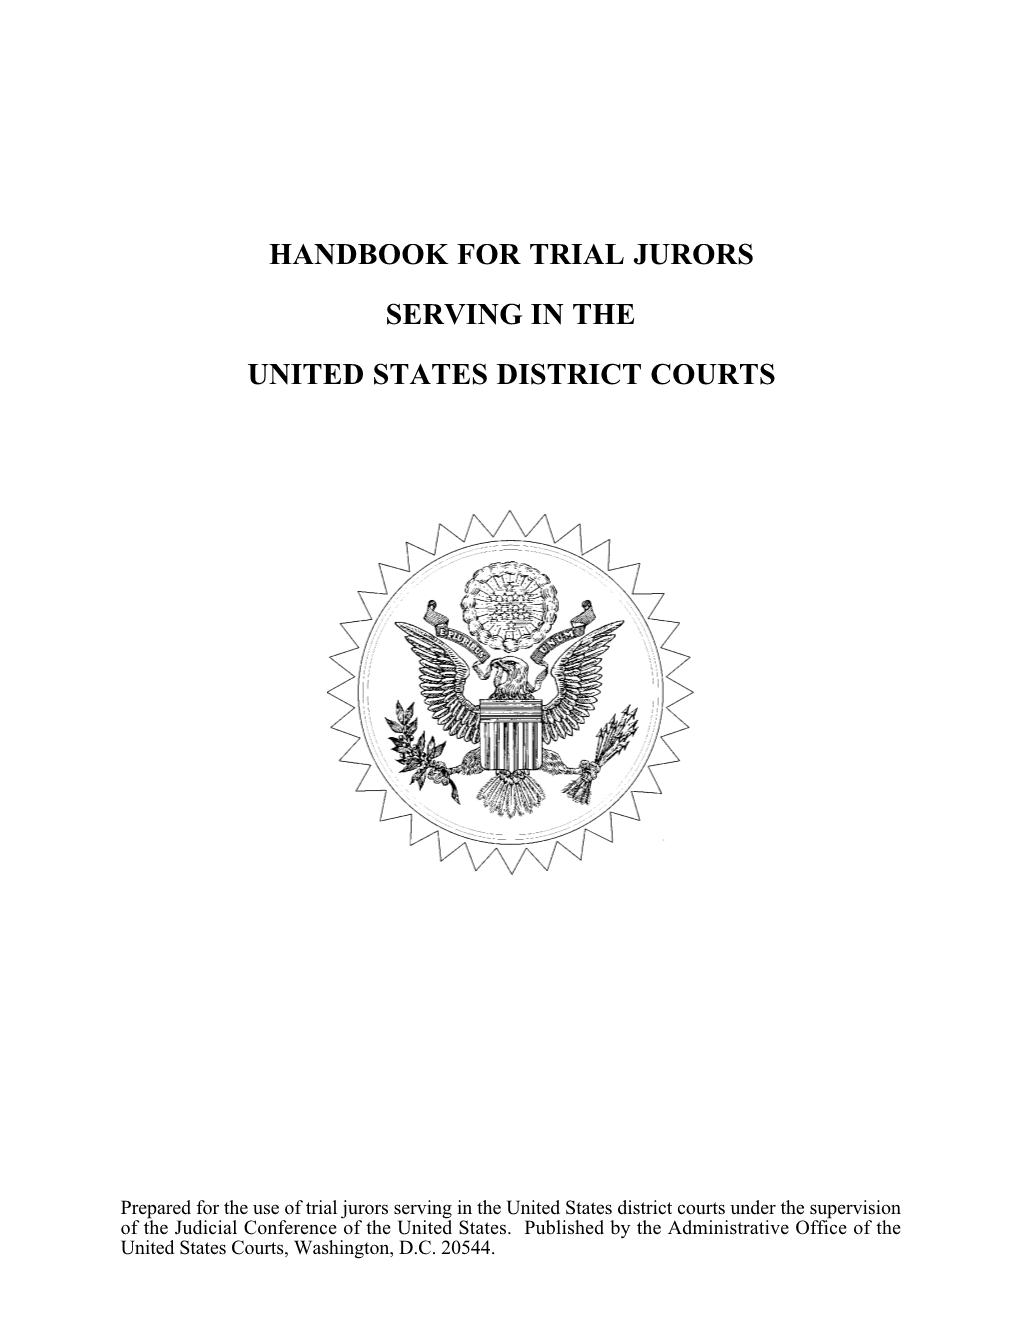 Handbook for Trial Jurors Serving in the United States District Courts